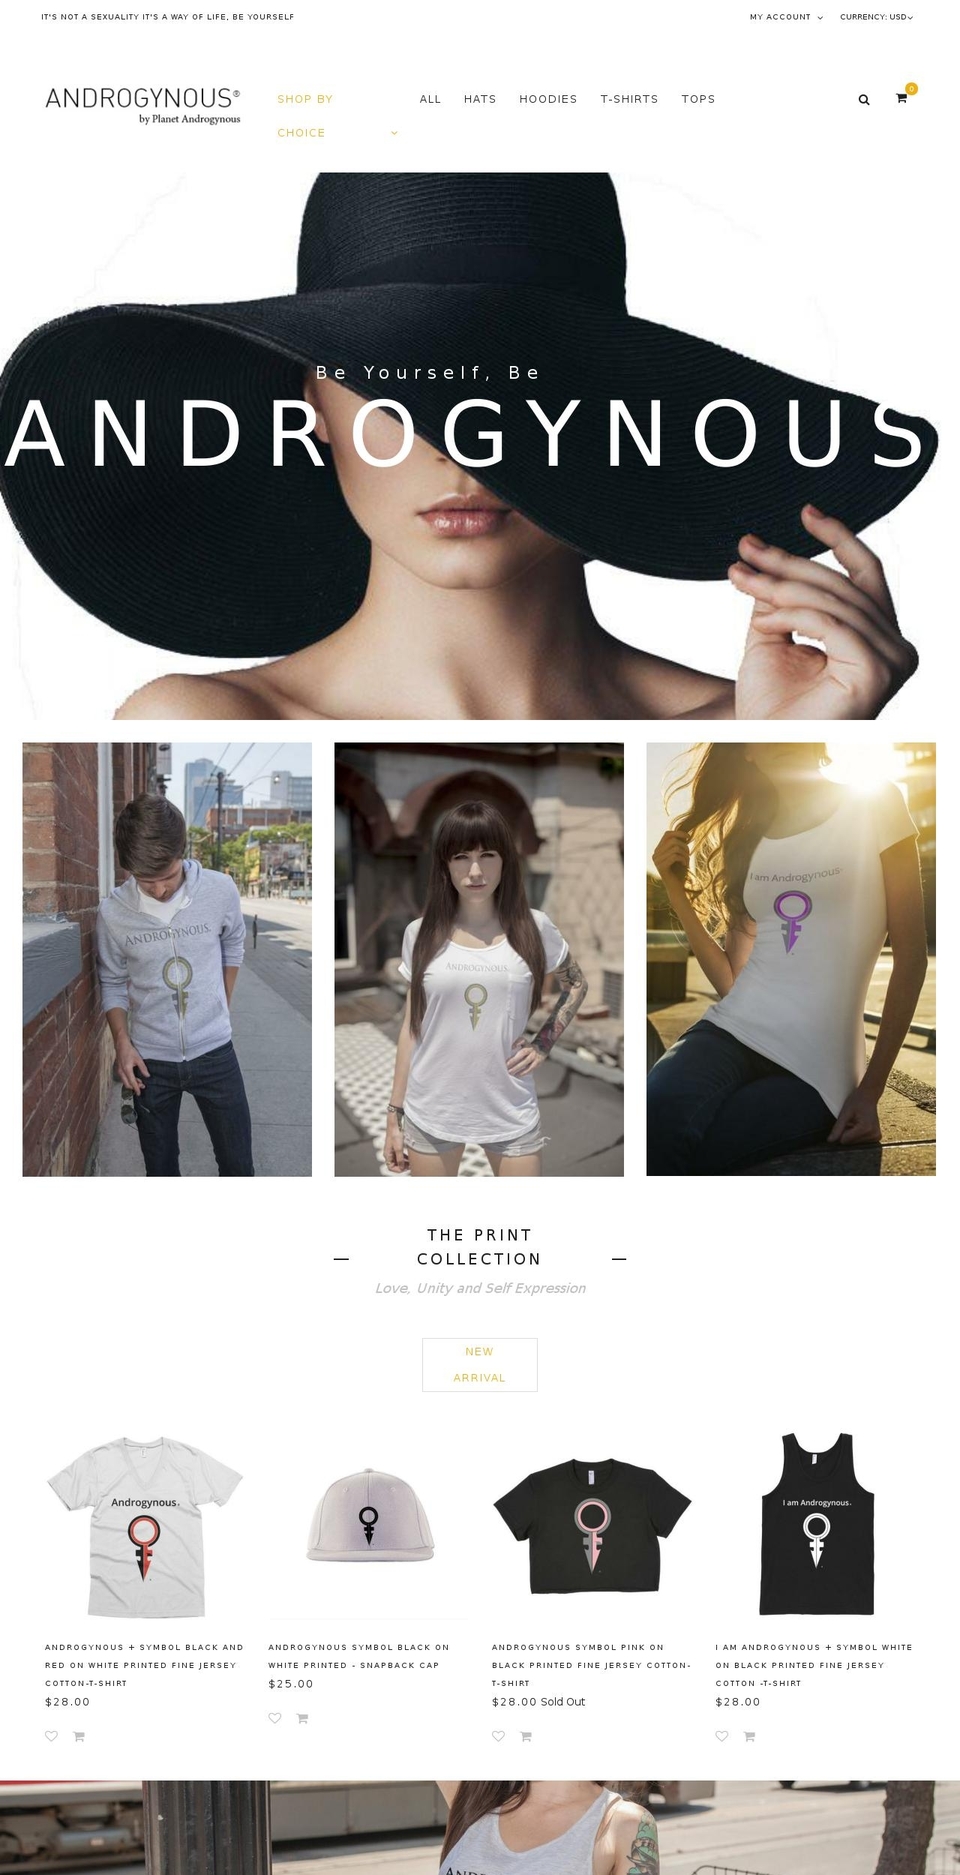 Androgynous Apparel Shopify theme site example androgynousapparel.com